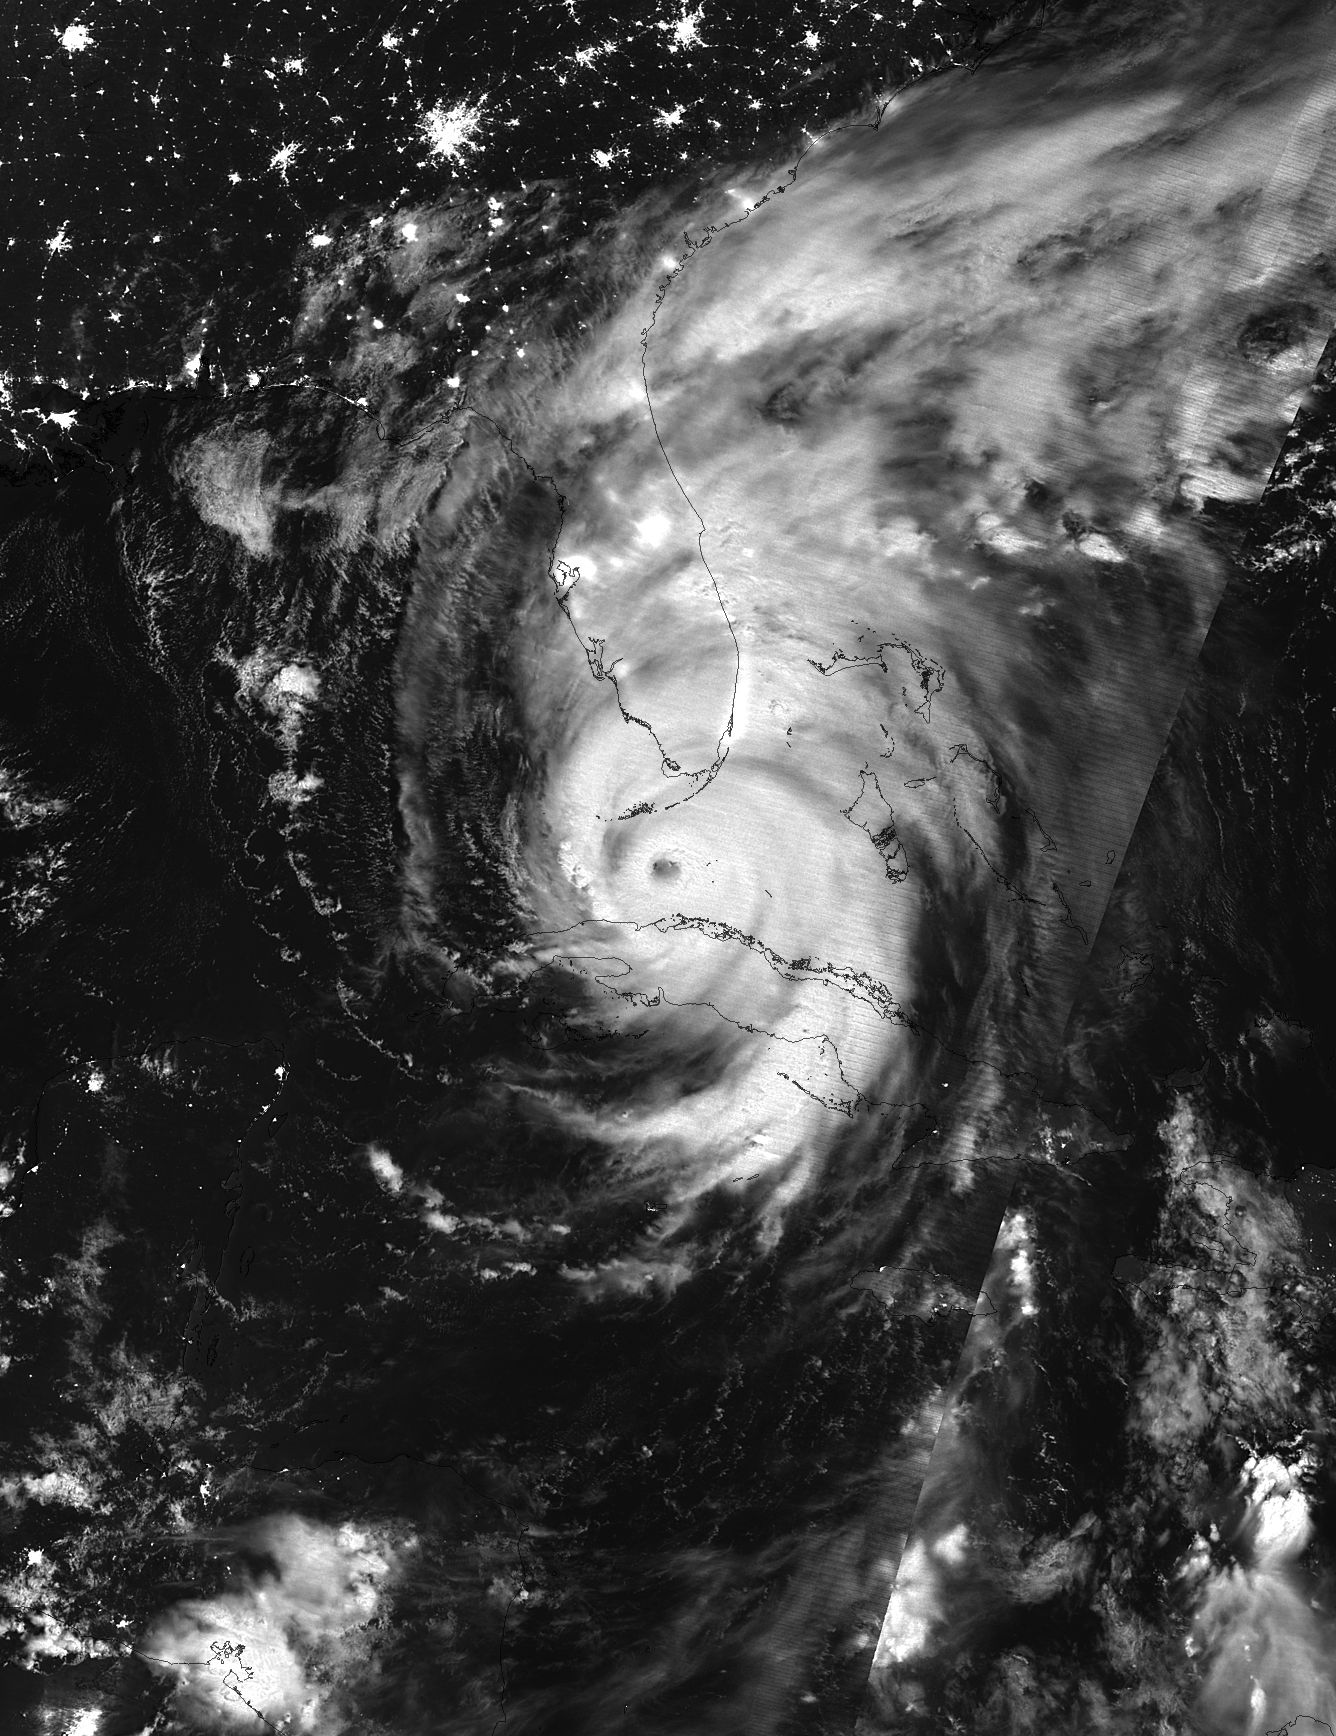 Black and white satellite image of Irma at night, with a clear eye over the ocean and electric lights glowing on land.